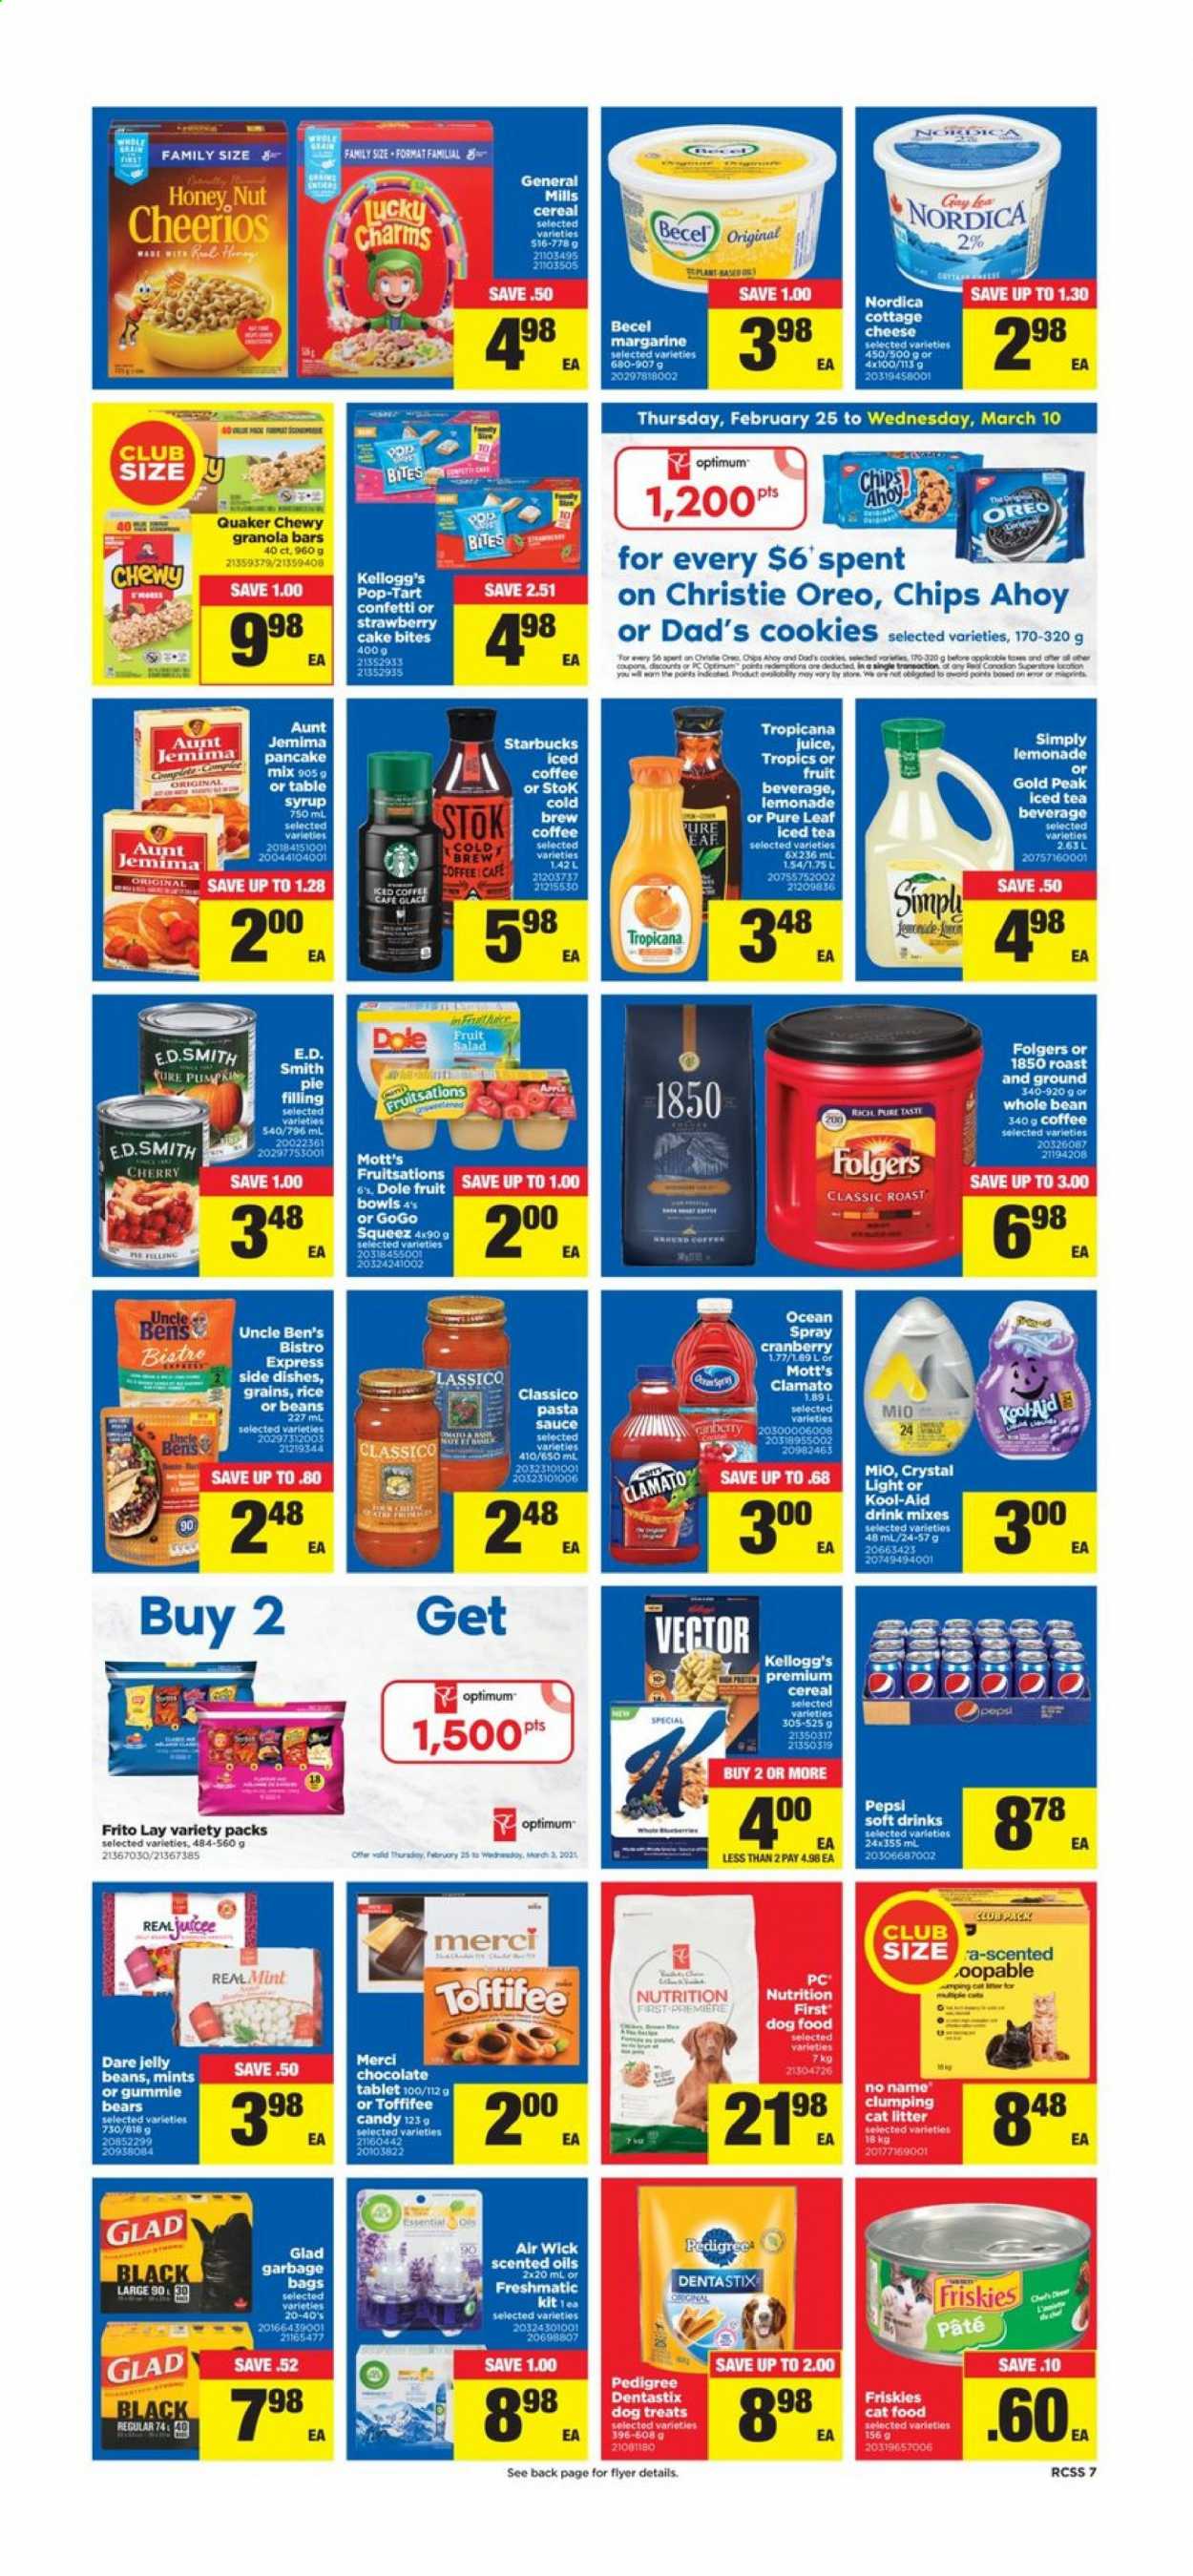 thumbnail - Circulaire Real Canadian Superstore - 25 Février 2021 - 03 Mars 2021 - Produits soldés - Oreo, margarine, granola, cookies, chips, Pepsi, café, Starbucks, table, Friskies, glace, Kellogg's, Pedigree, Tropicana, Air Wick, Apple, Candy. Page 7.